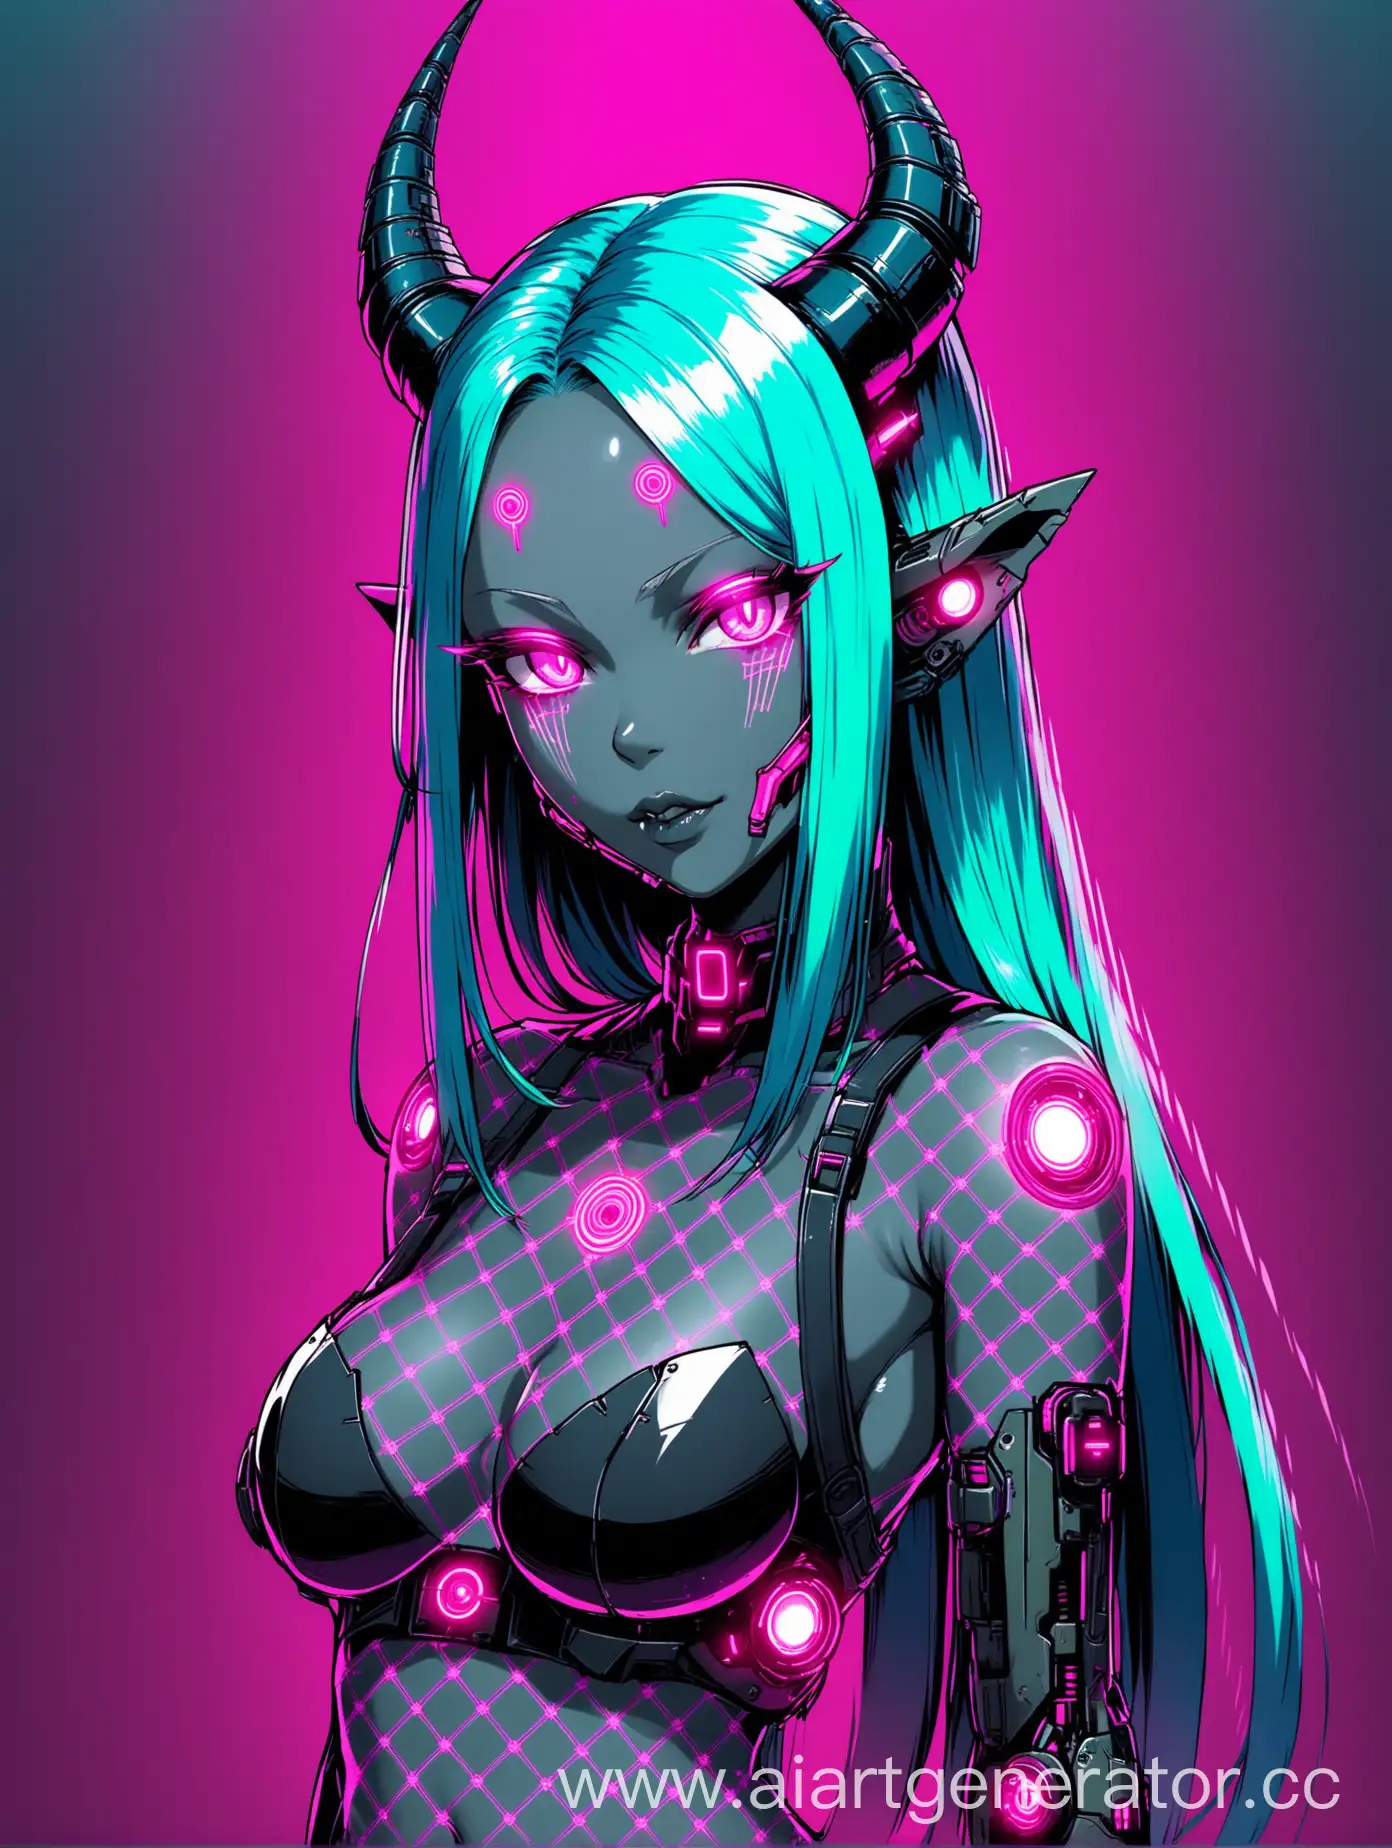 Cyberpunk-Demon-Girl-with-Blue-and-Pink-Horns-and-Cyborg-Features